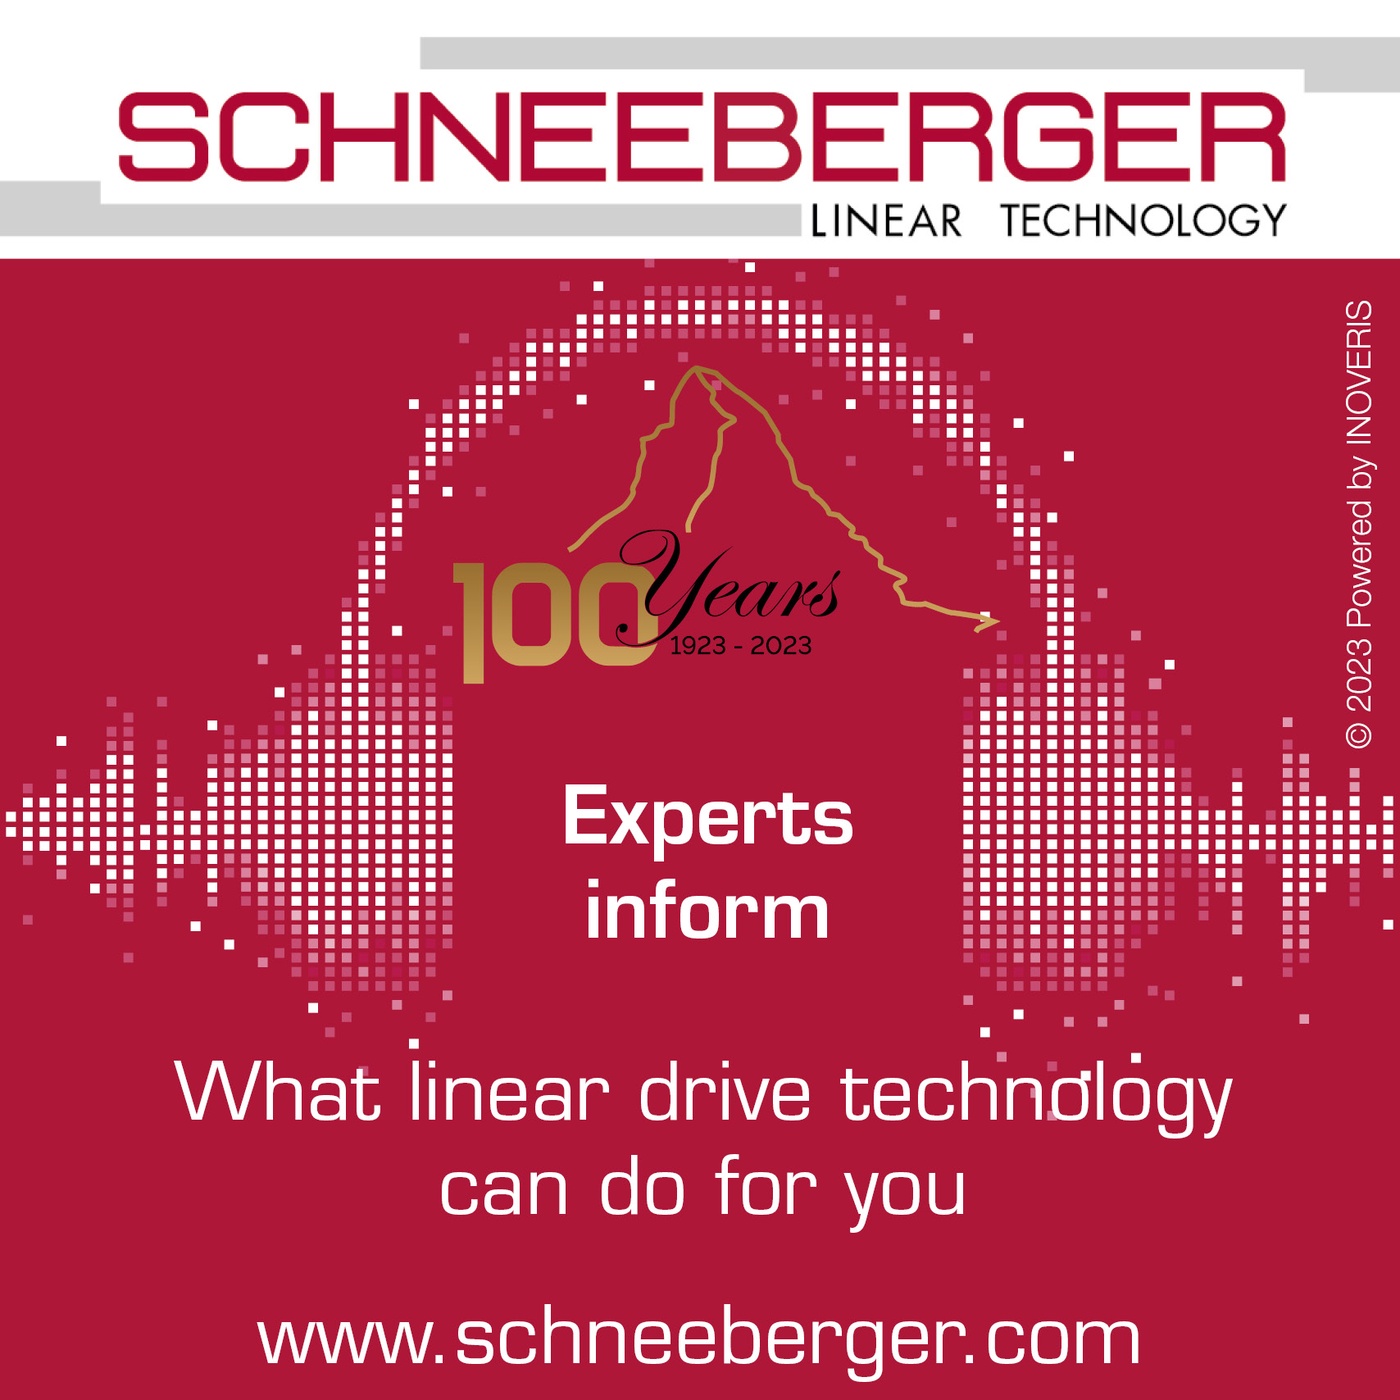 Podcast with Alexandra Kirchhoff on the new SCHNEEBERGER E-SHOP